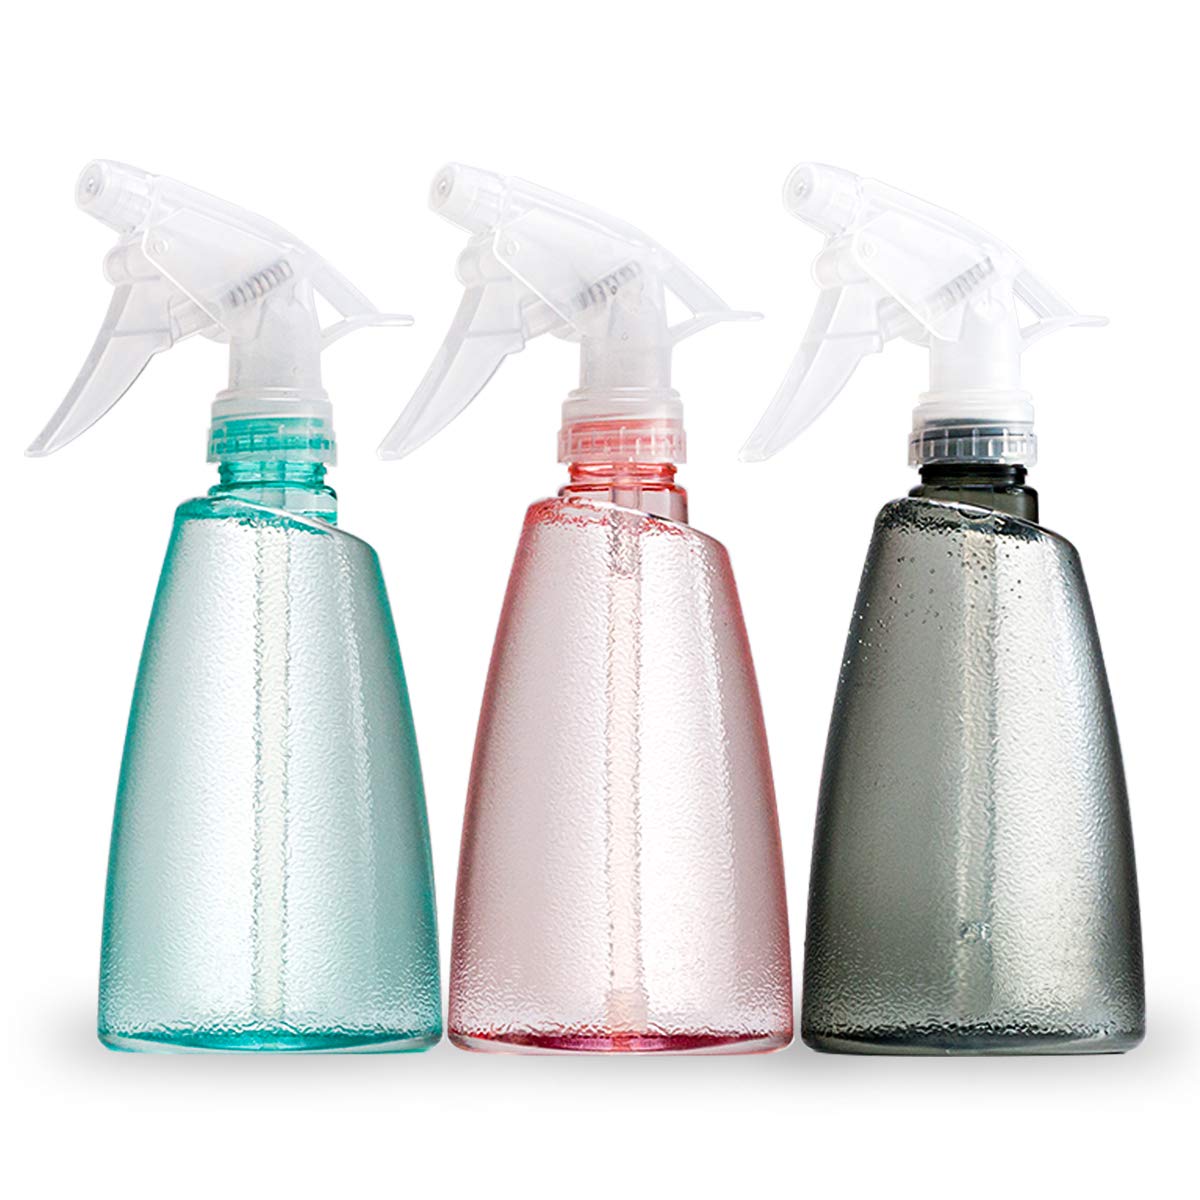 REPUGO Empty Plastic Spray Bottles(3 pack)–17oz Spray Bottle, Squirt Bottle, Plastic Spray Bottles for Cleaning Solutions, Hair, Essential Oil, Plants, Refillable Sprayer with Mist and Stream Mode